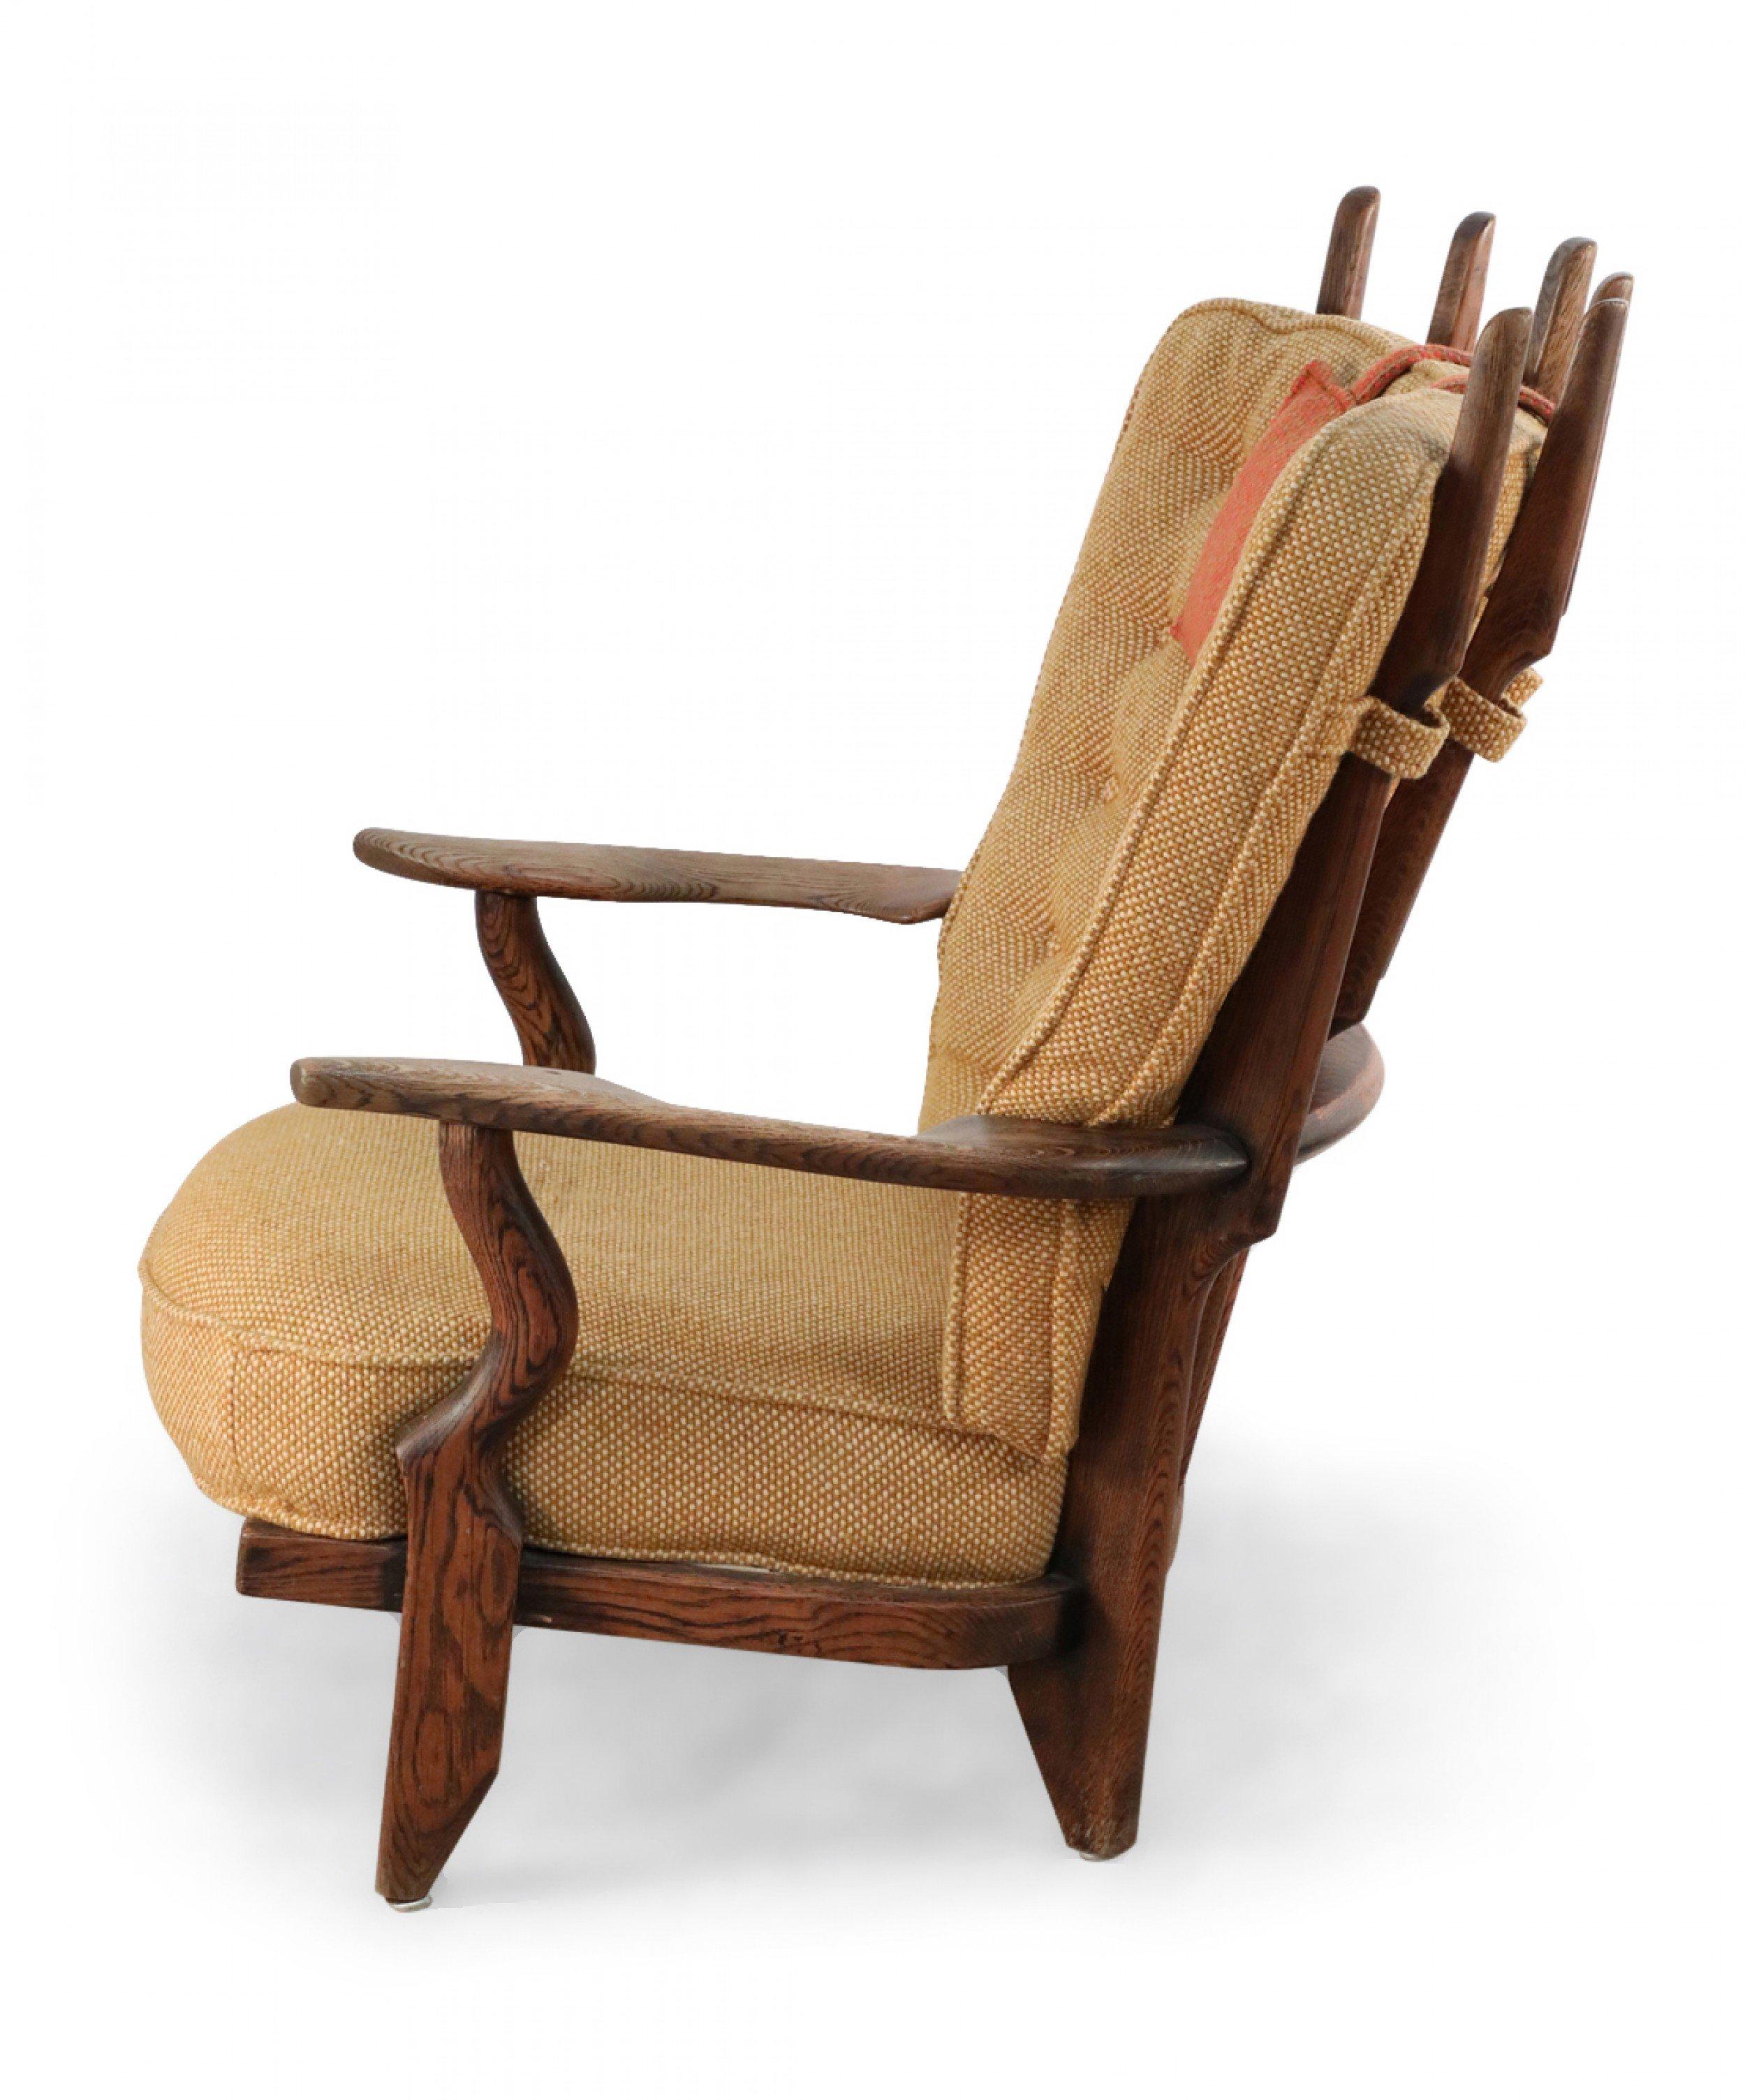 Mid-century French oak armchair with six fanning back slats and beige button tufted upholstery with an orange head cushion (Guillerme et Chambron).